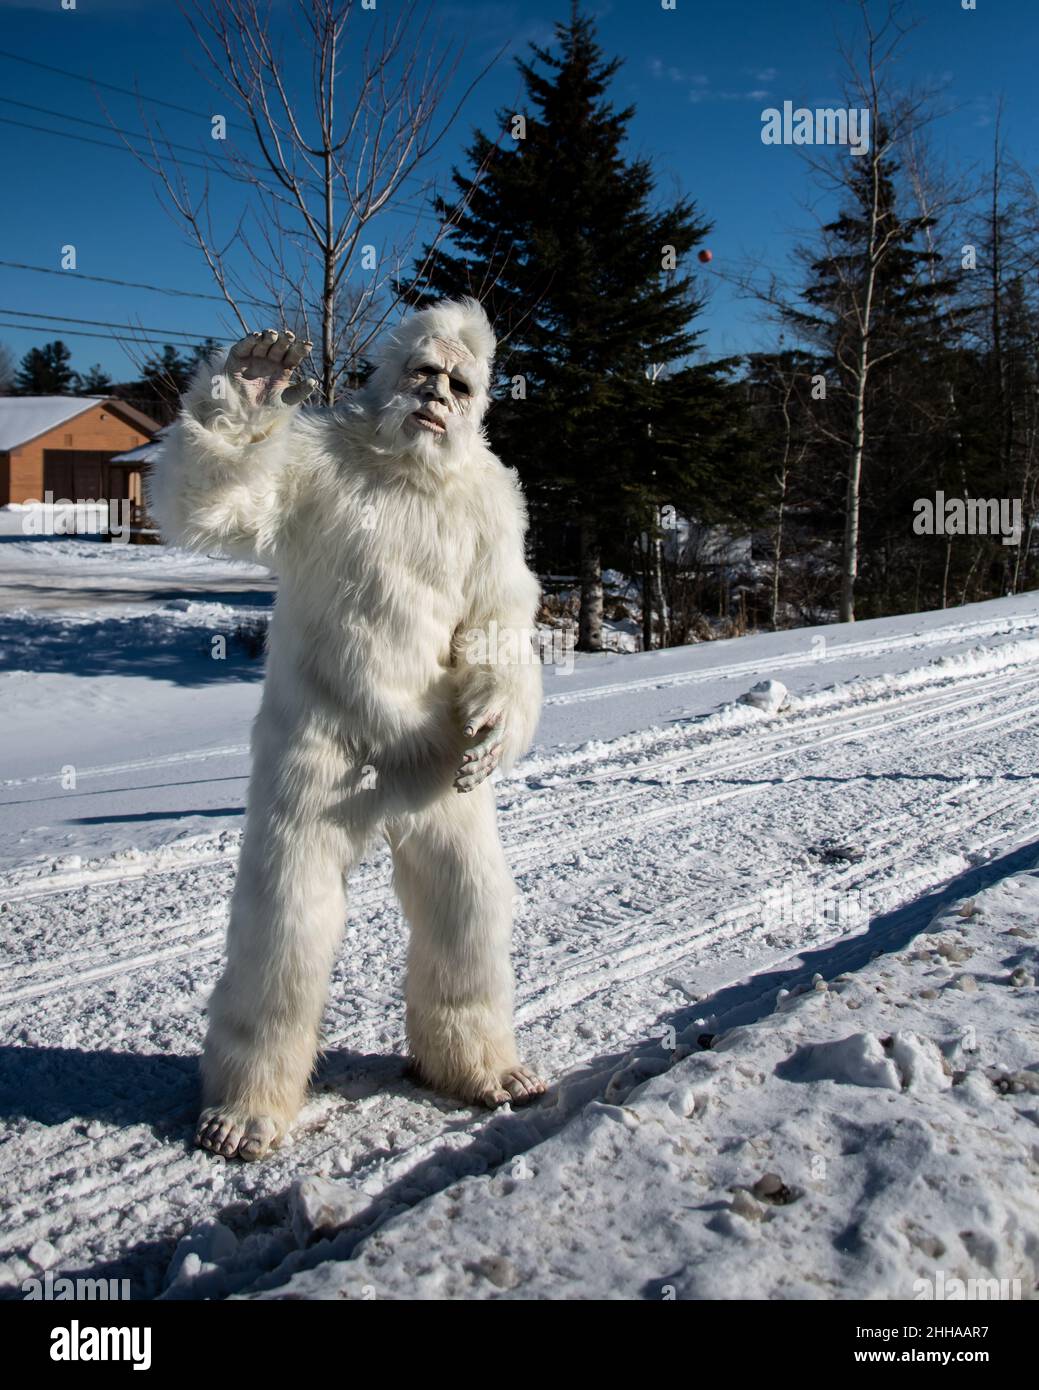 A person dressed in a Yeti or Abominable Snowman suit standing the snow on a snowmobile trail in Speculator, NY in the Adirondack Mountains Stock Photo